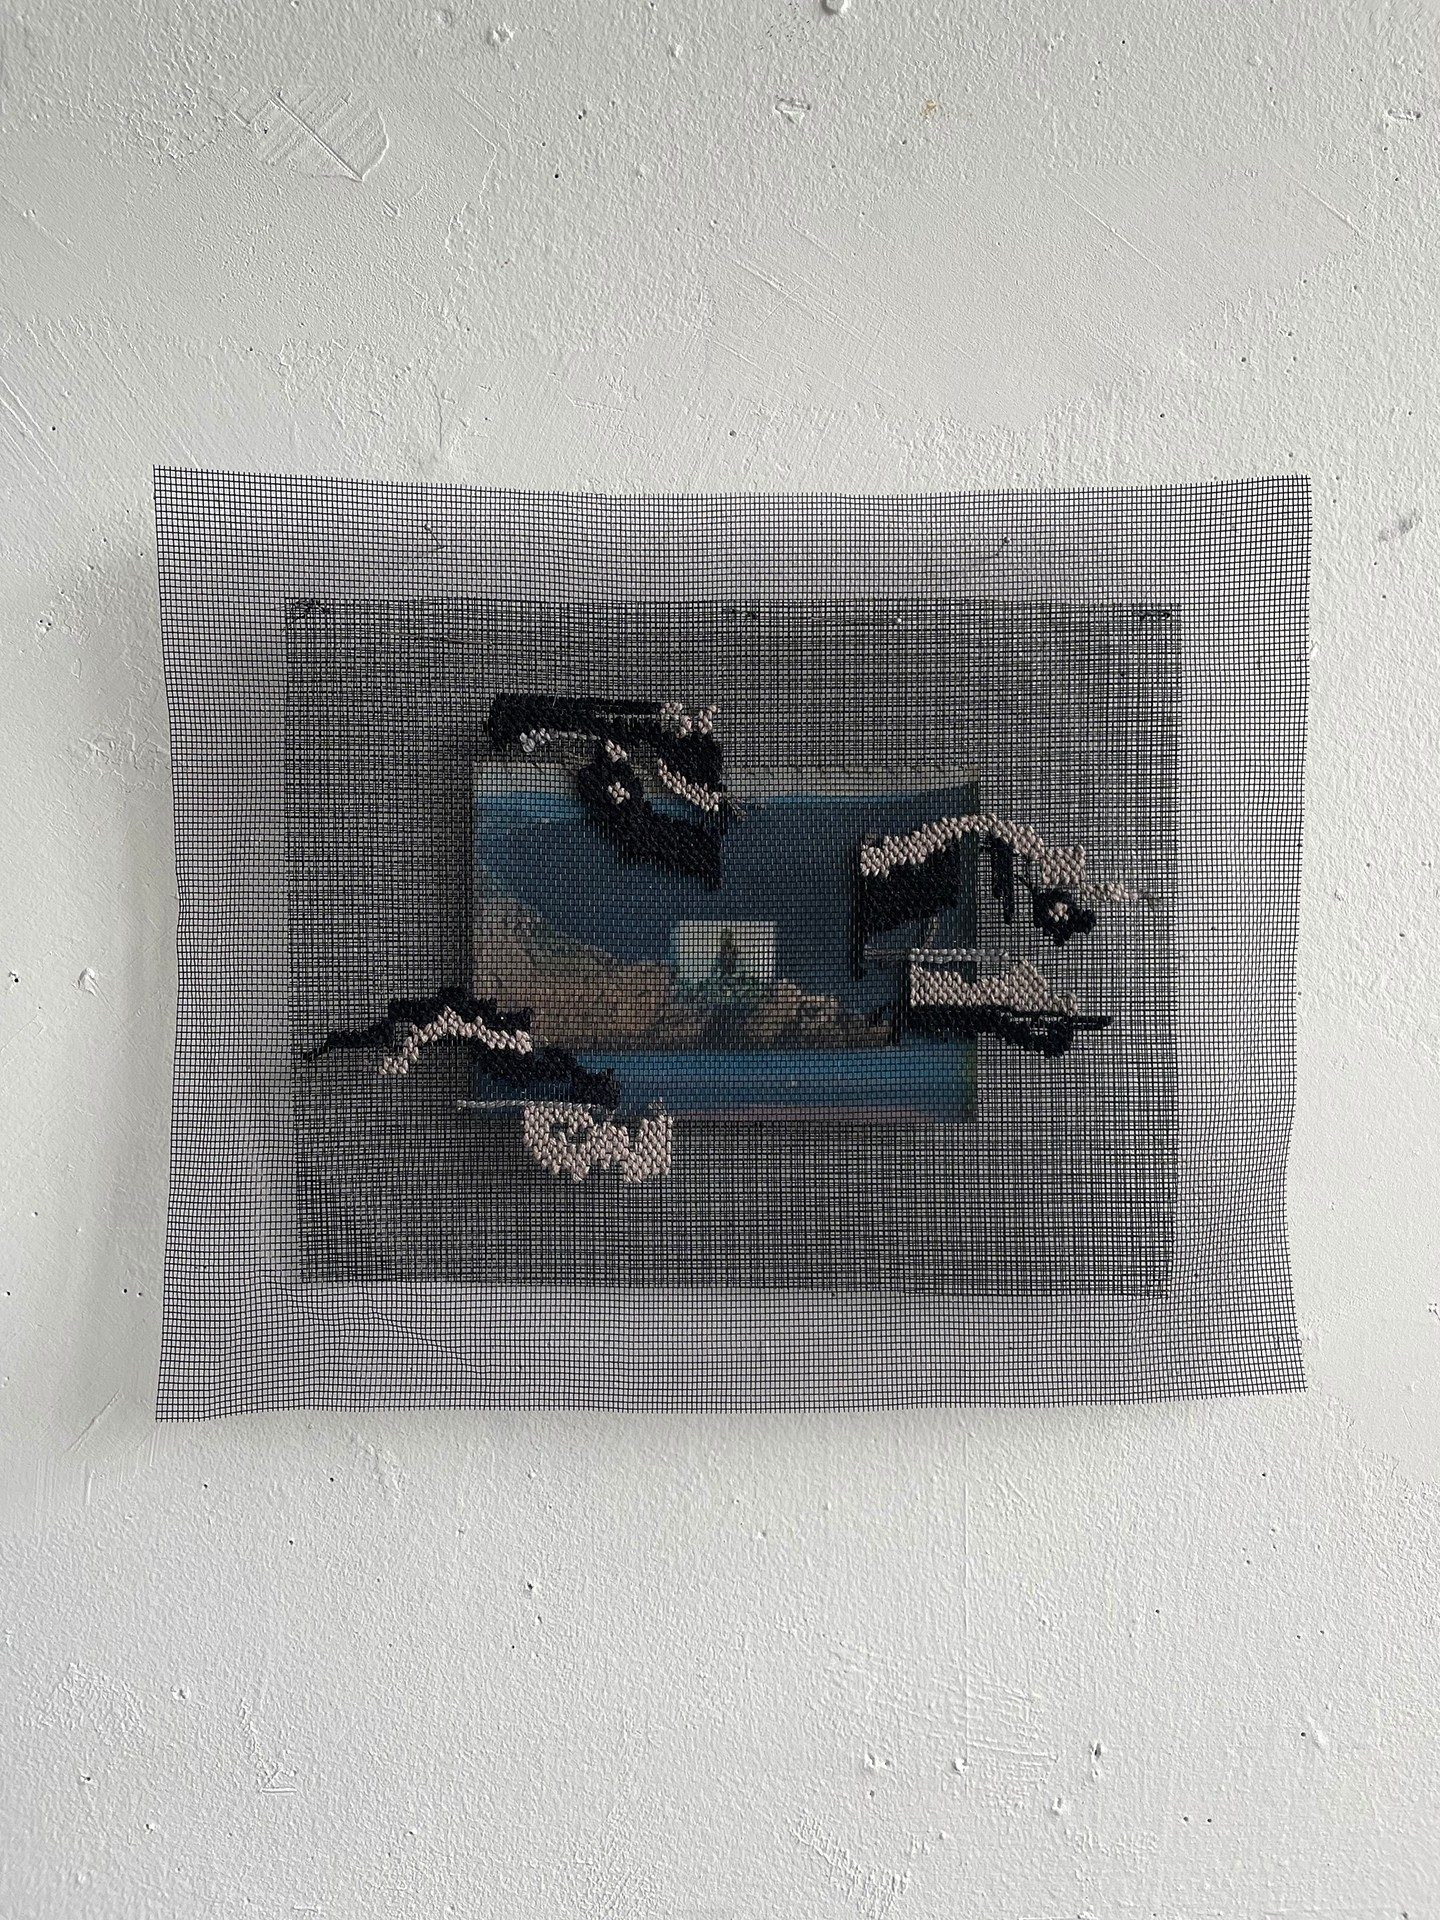 artwork on a wall: a layered sculpture/image of a landscape